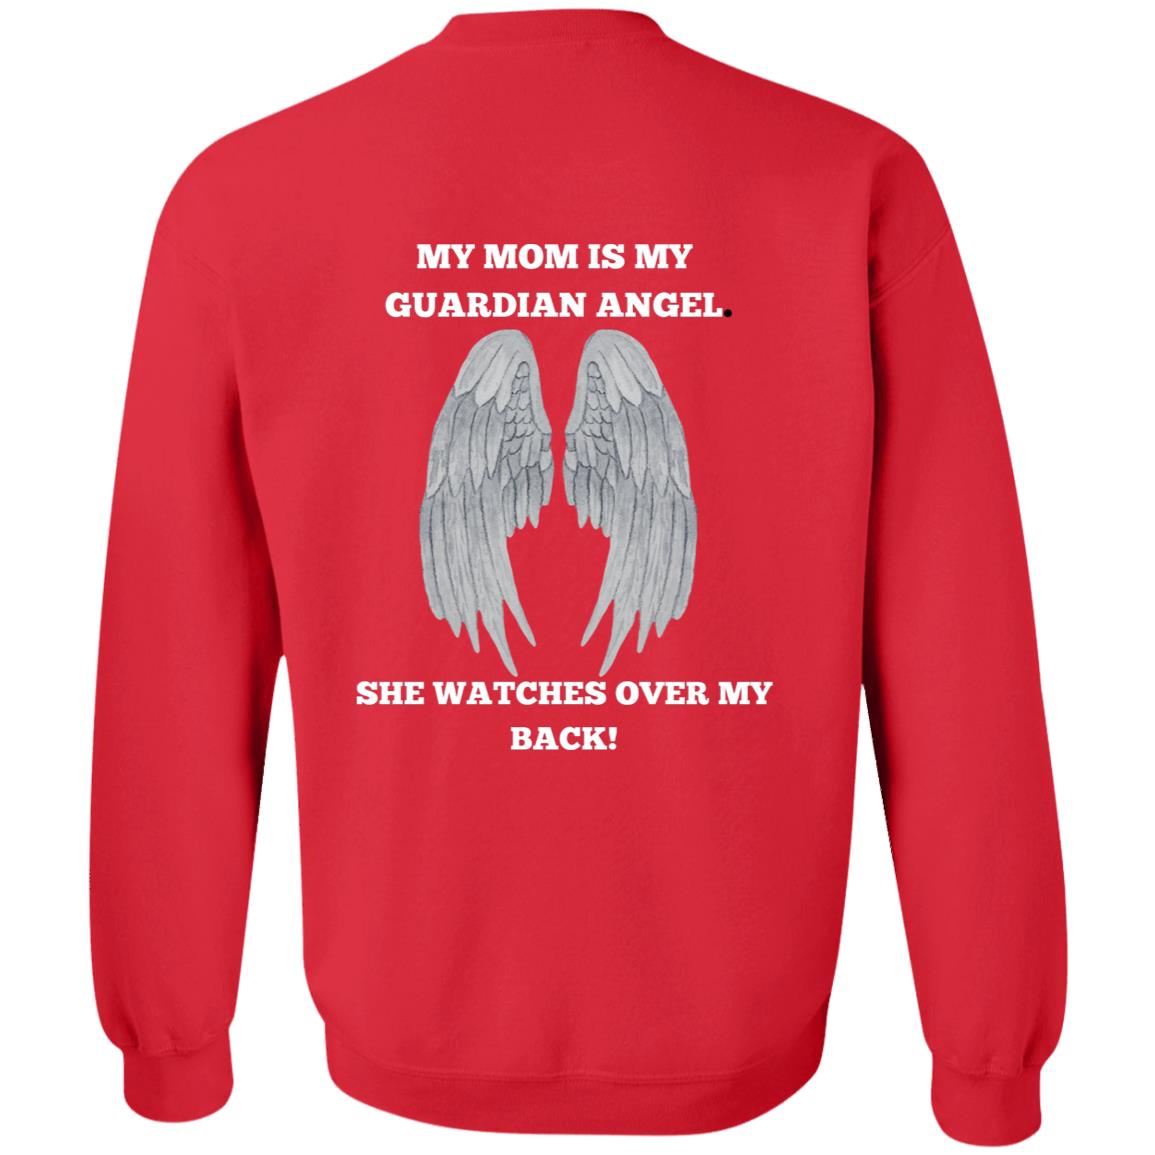 Get trendy with My Mom is My Guardian Angel Sweatshirt -  available at Good Gift Company. Grab yours for $29.88 today!